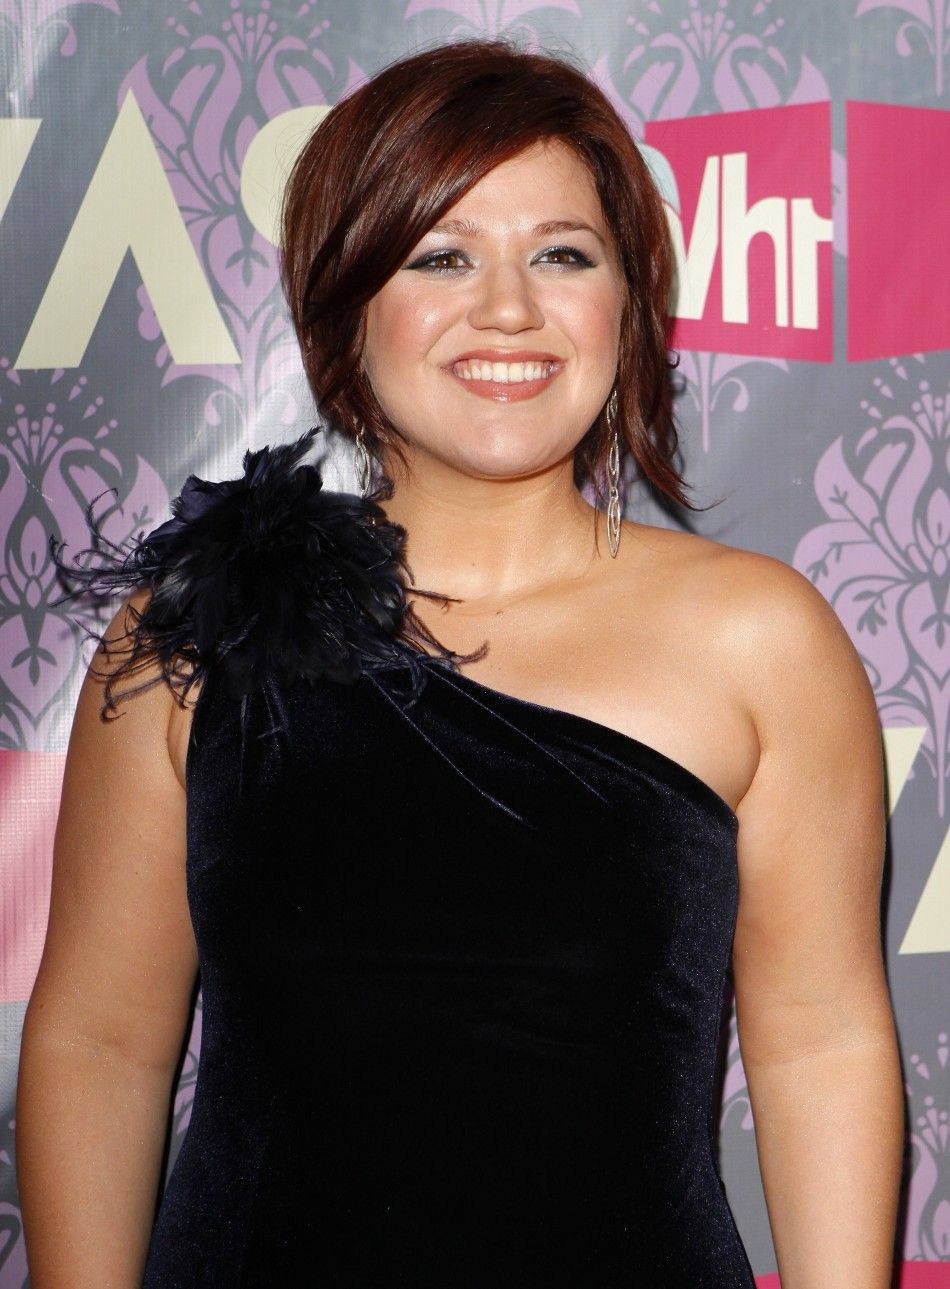 Kelly Clarkson: From ‘Thankful’ to ‘Stronger’ [PHOTOS]